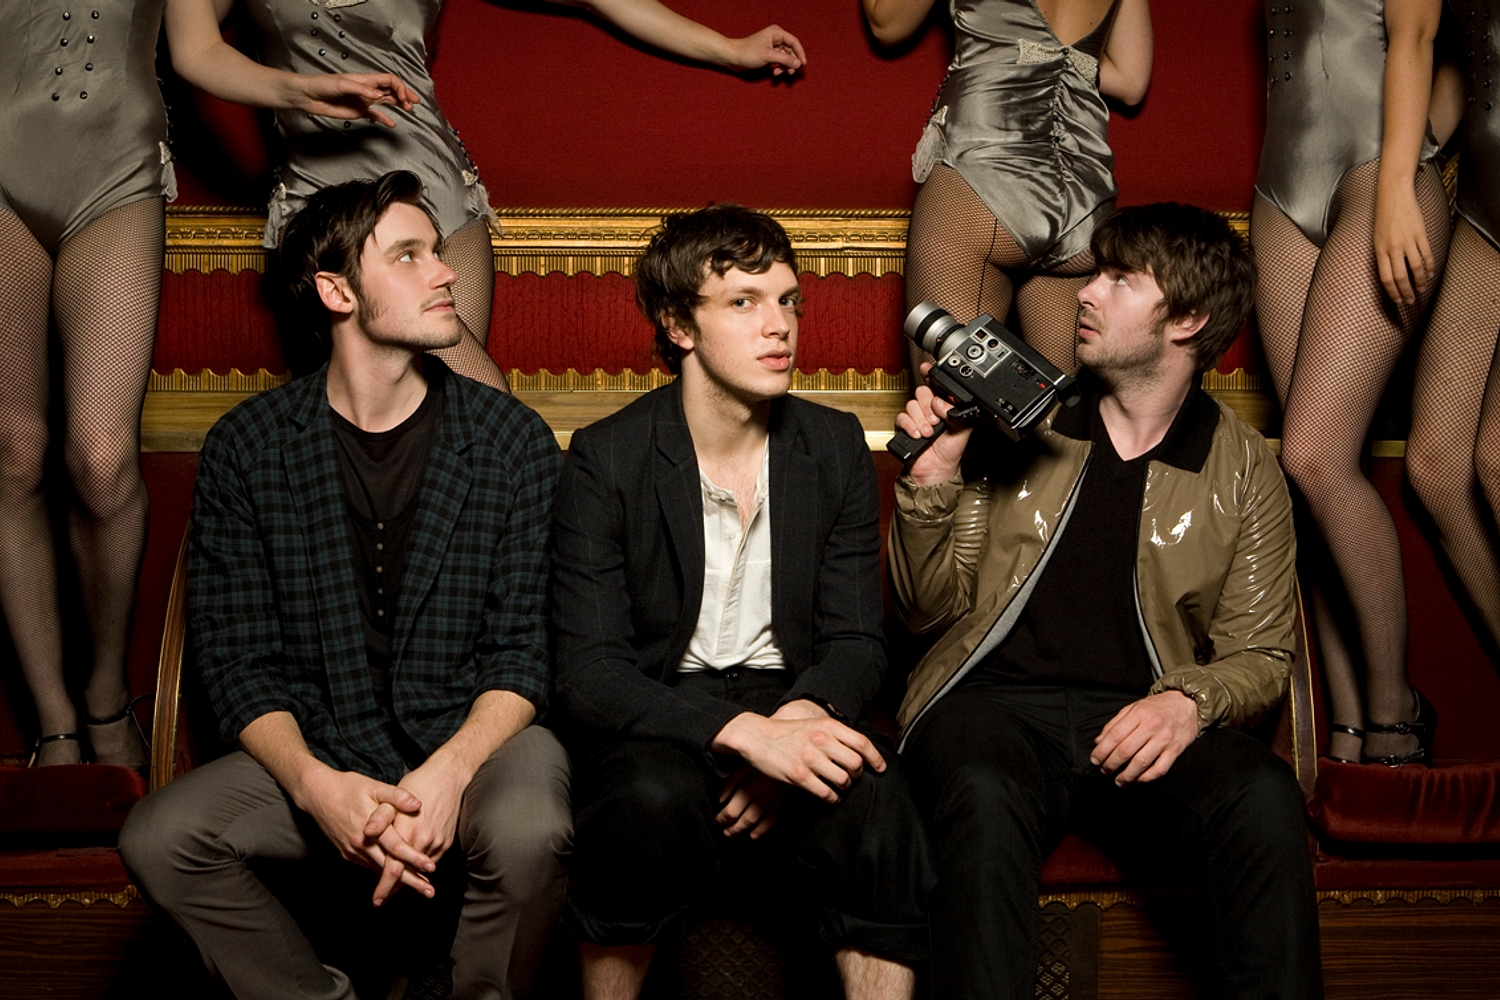 Looking back on Friendly Fires’ self-titled debut